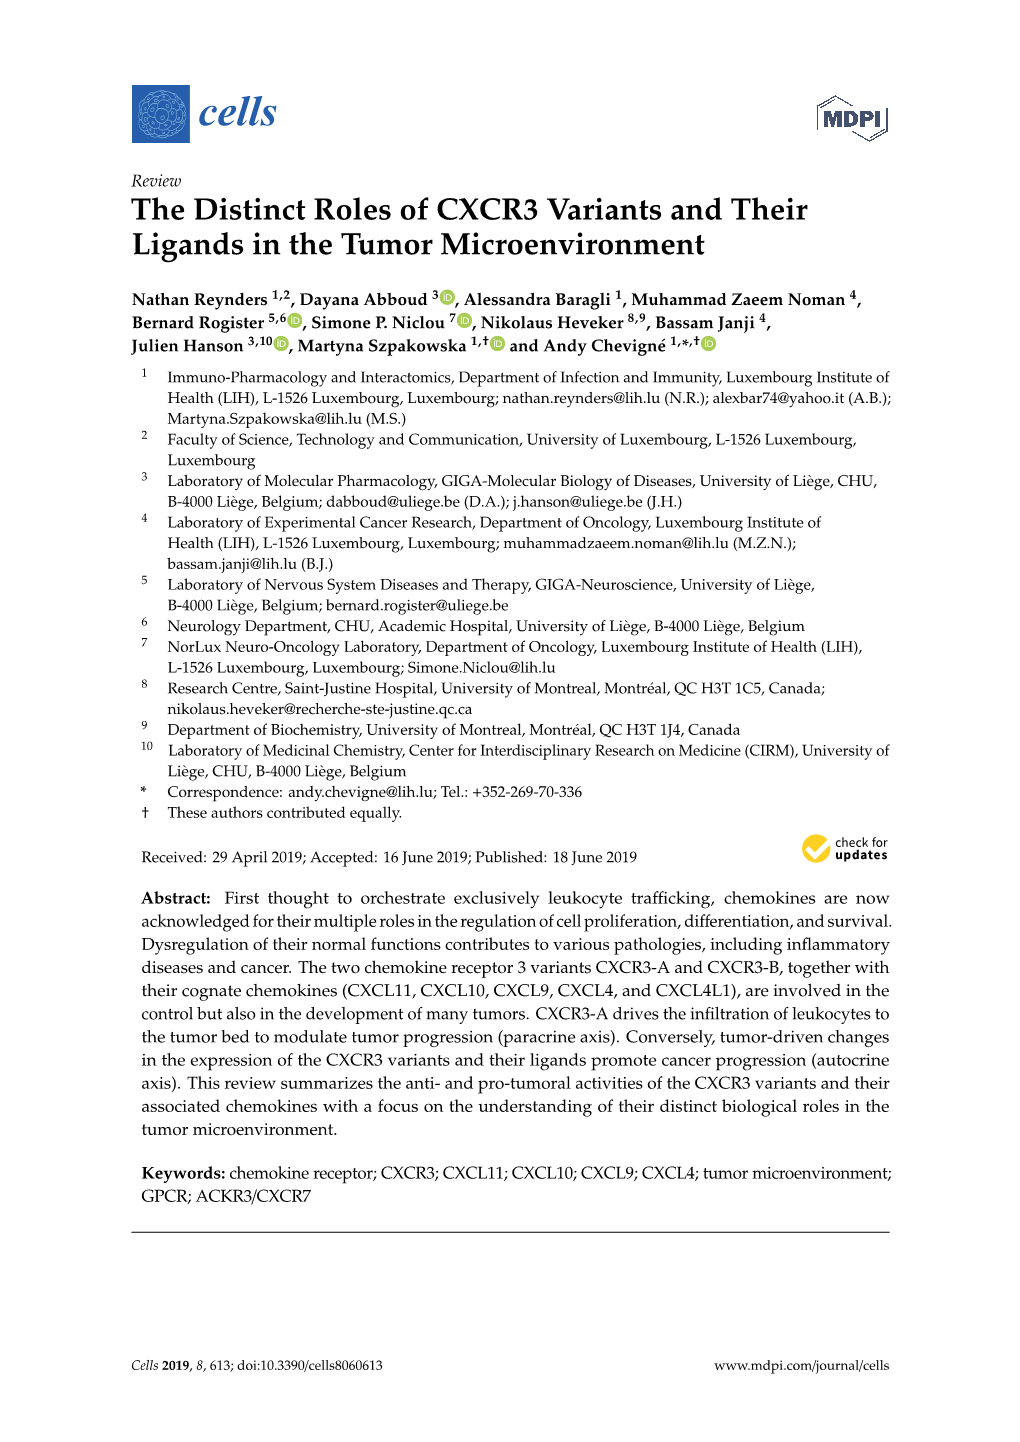 The Distinct Roles of CXCR3 Variants and Their Ligands in the Tumor Microenvironment